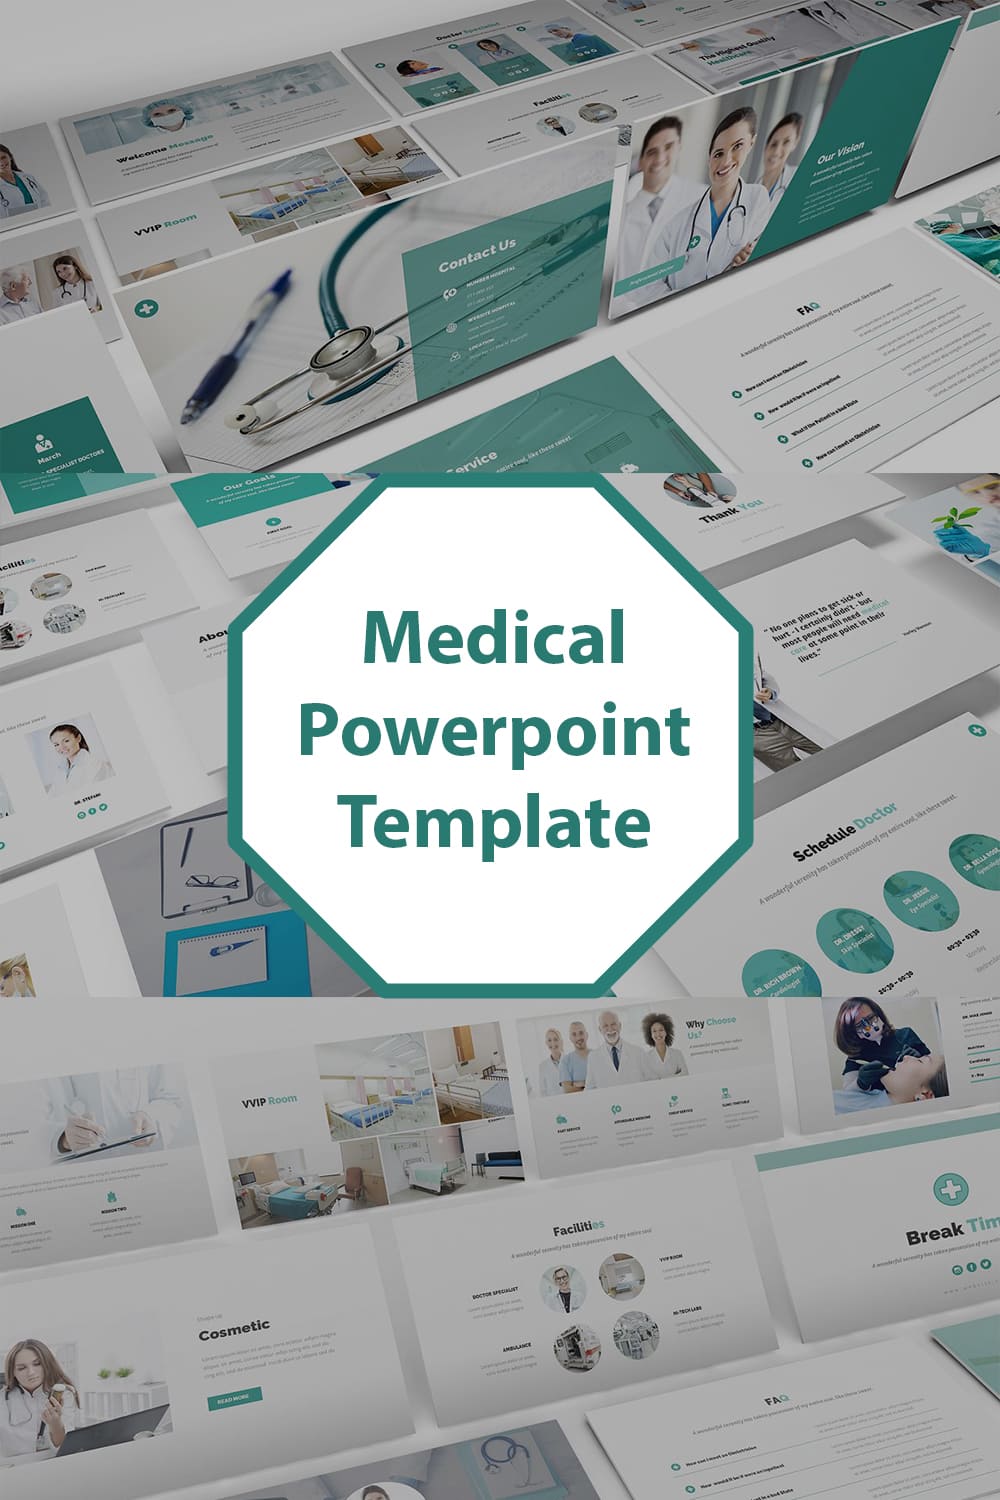 Medical Centre Powerpoint Presentation Template for your Medical and Health care business.